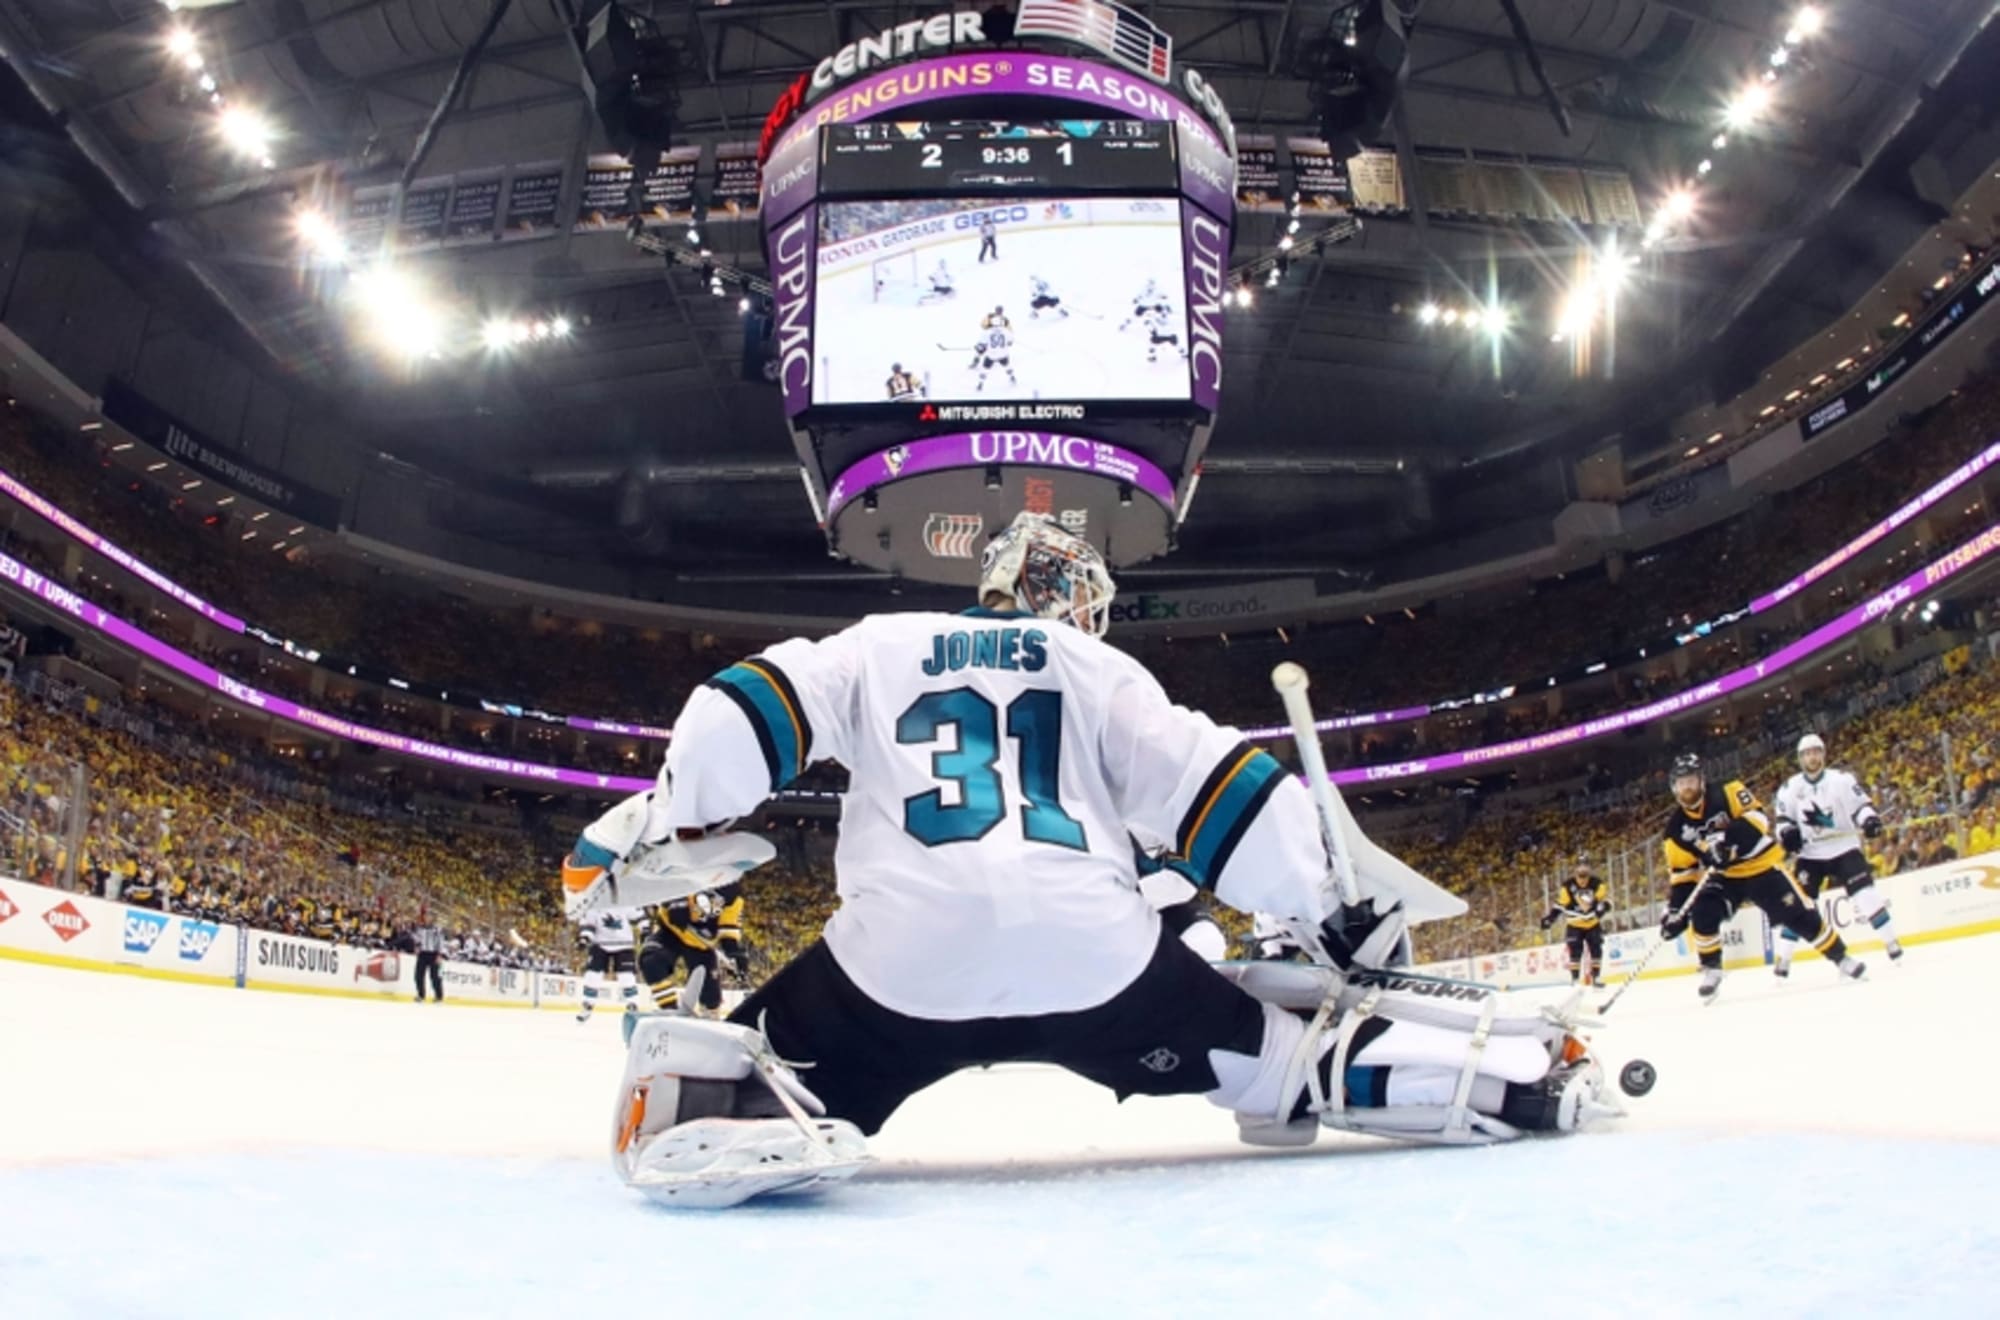 Sharks' goalie Martin Jones exits early in 7-0 rout by Knights